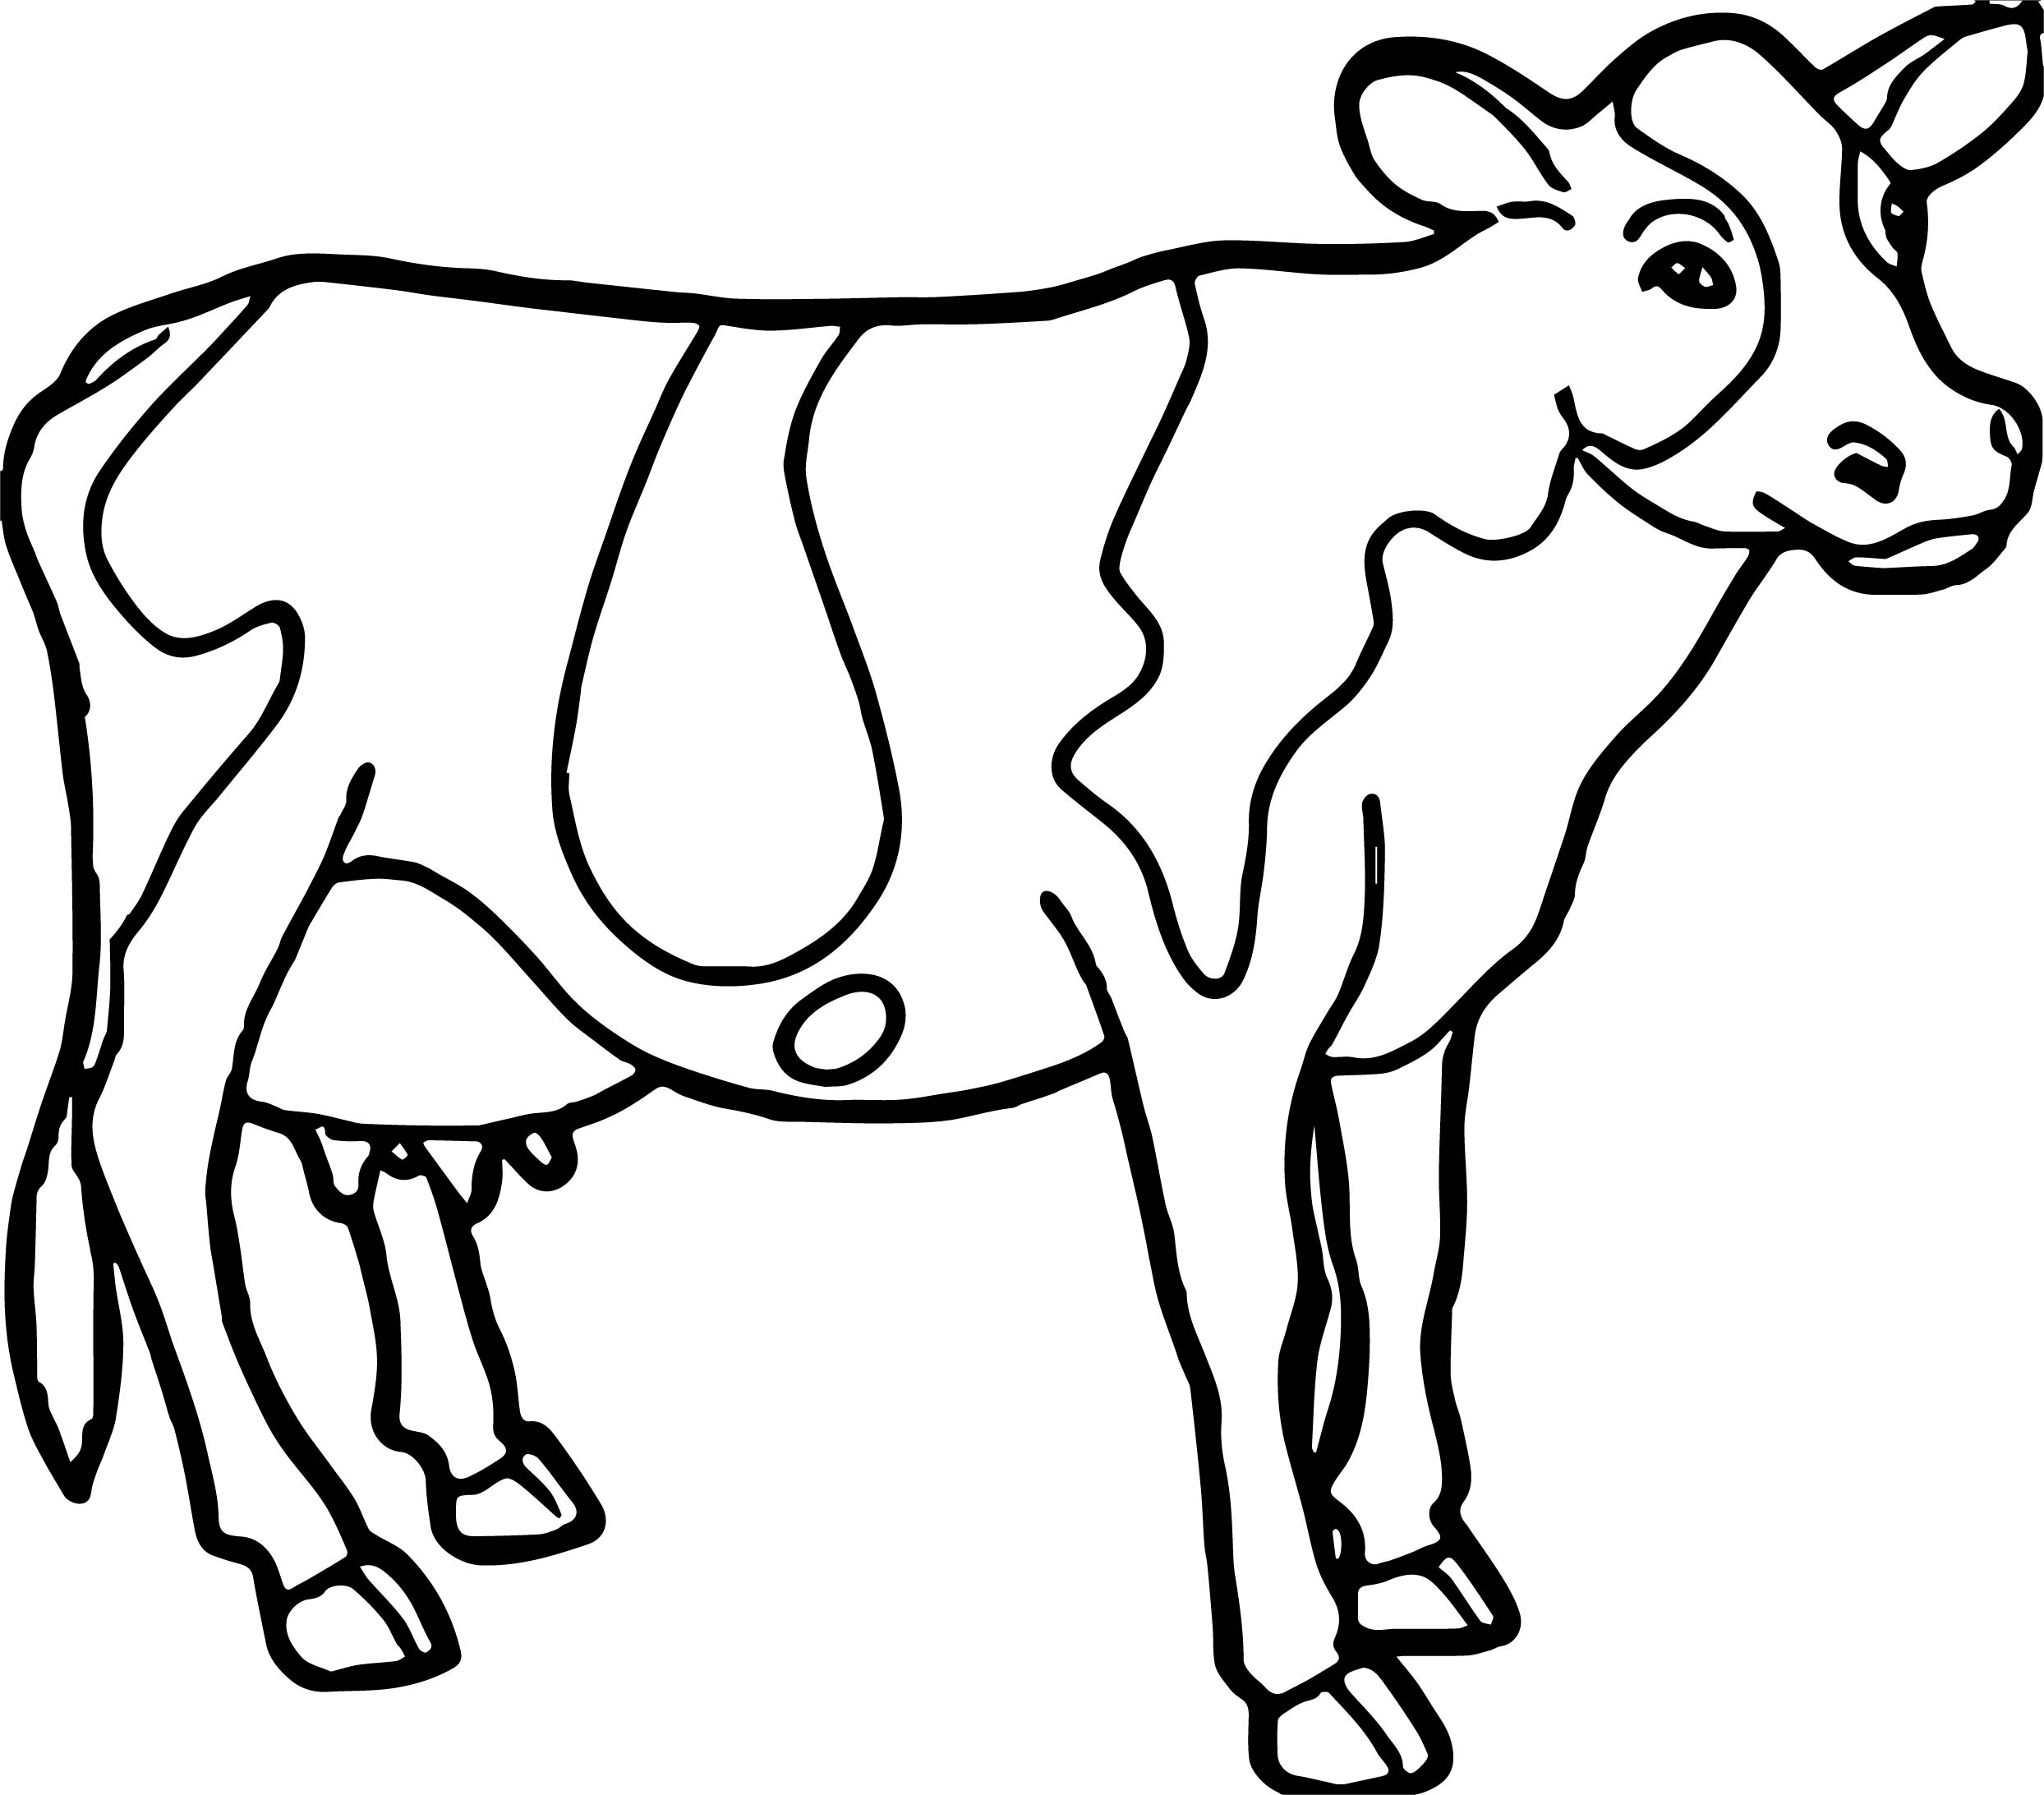 Cow Coloring Pages For Adults at GetColorings.com | Free printable ...